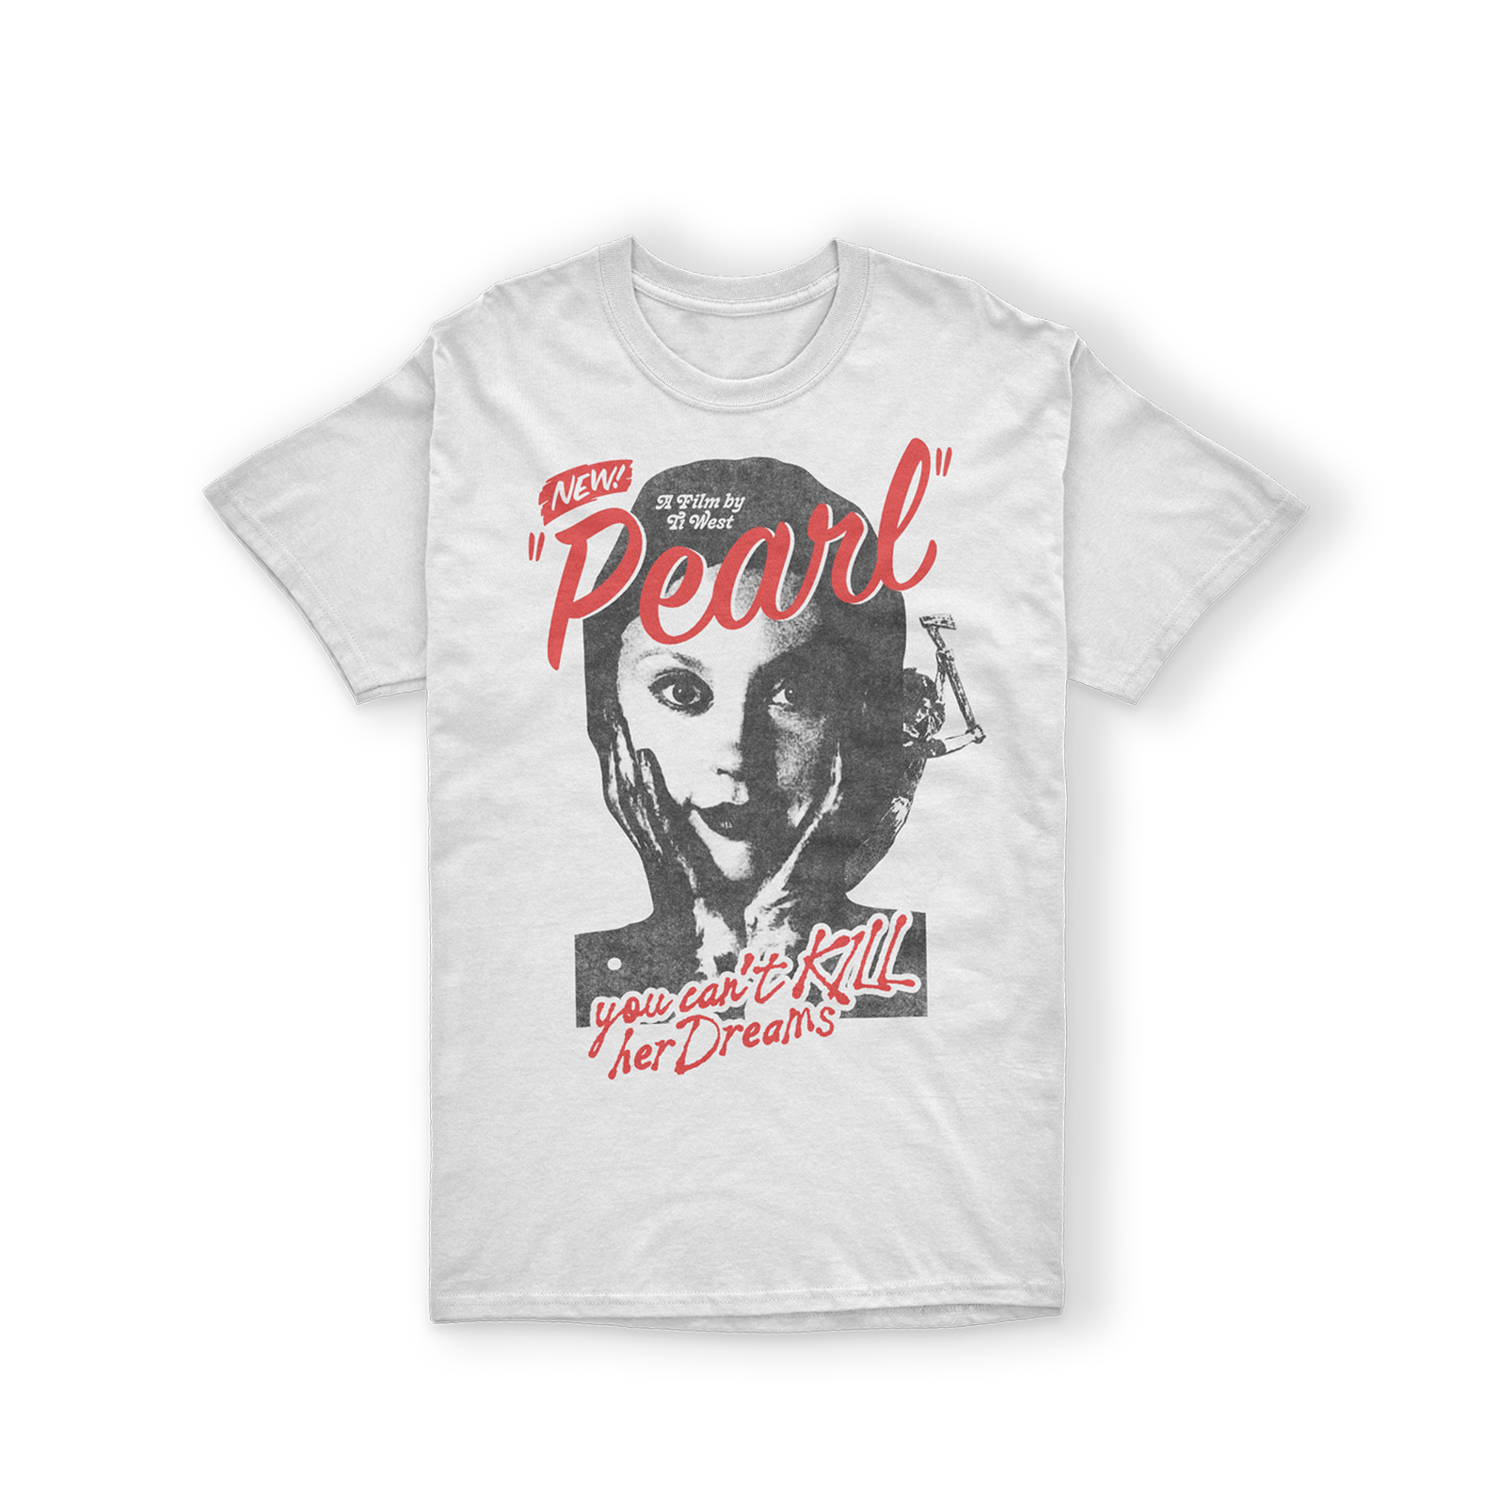 "You Can't Kill Her Dreams" - Short-Sleeve Unisex T-Shirt